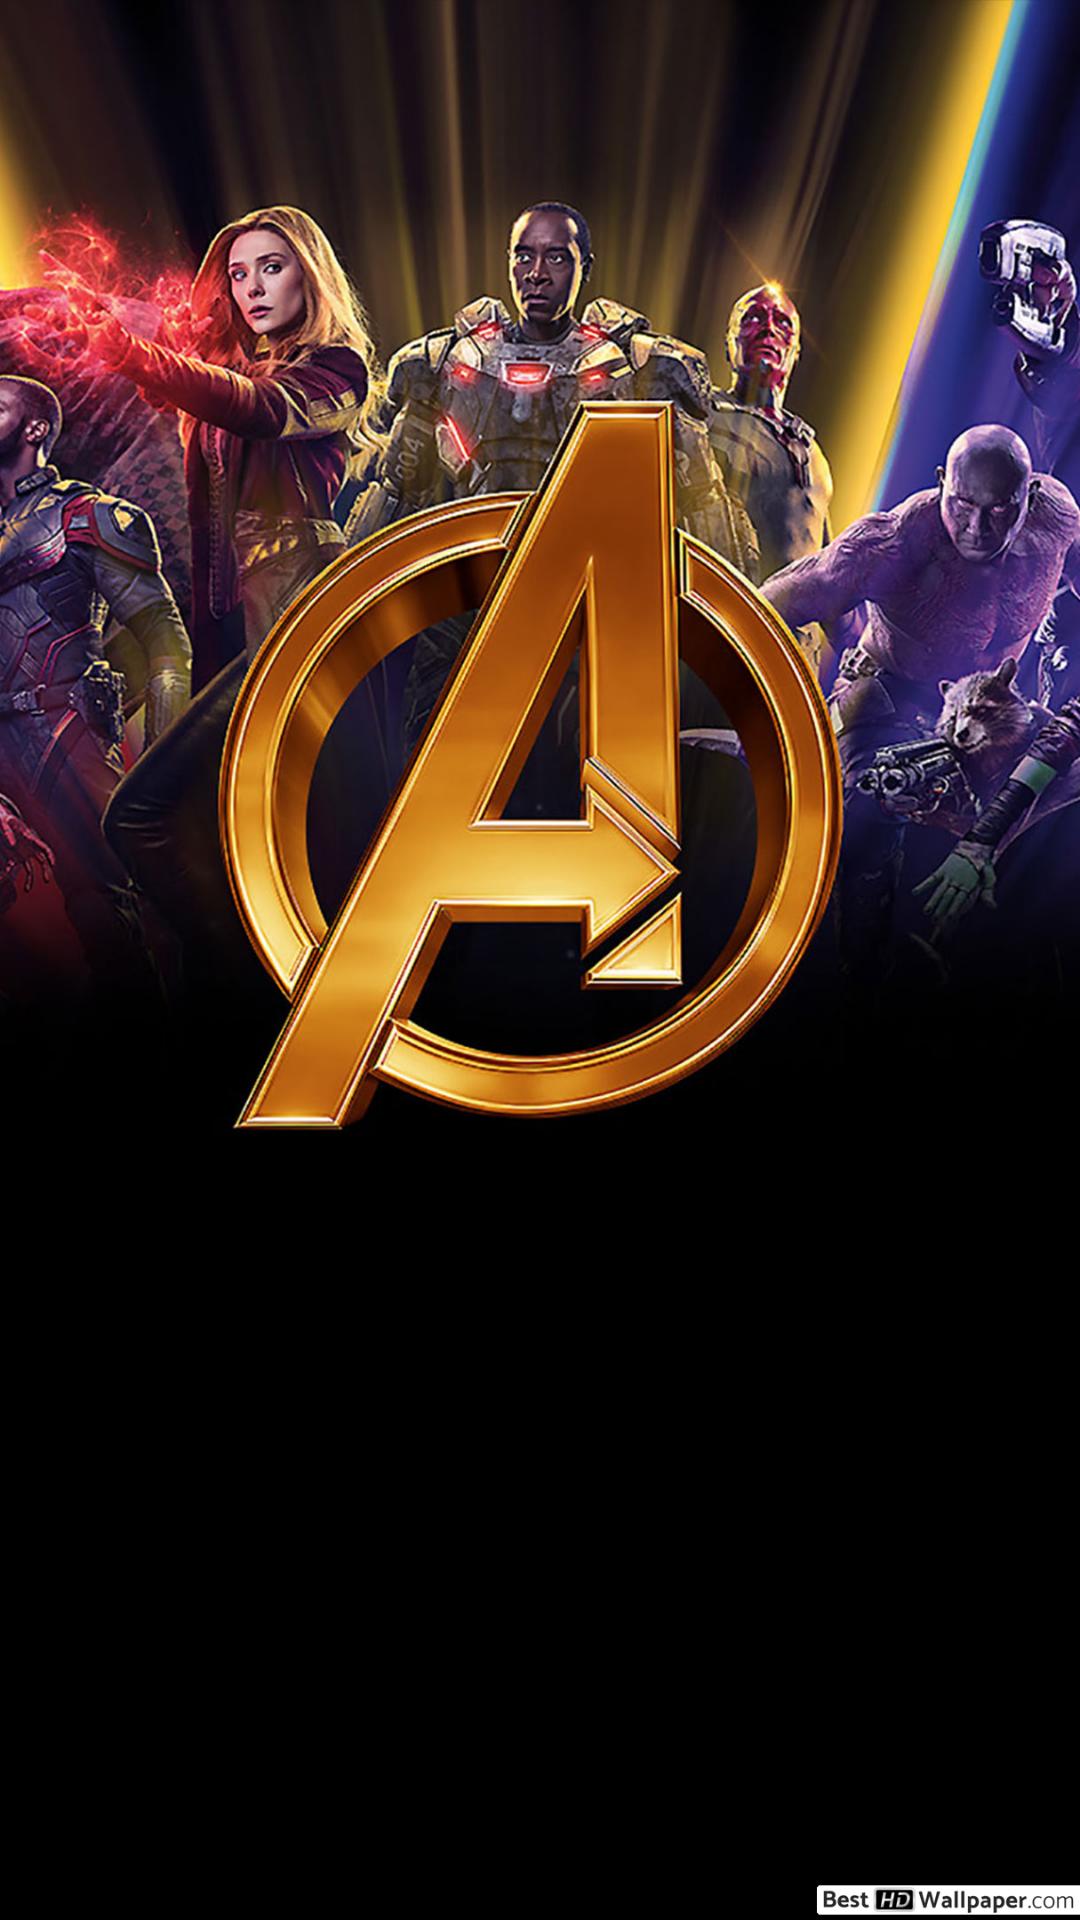 Apple iPhone 7 Plus, Avengers Wallpaper & Background Download